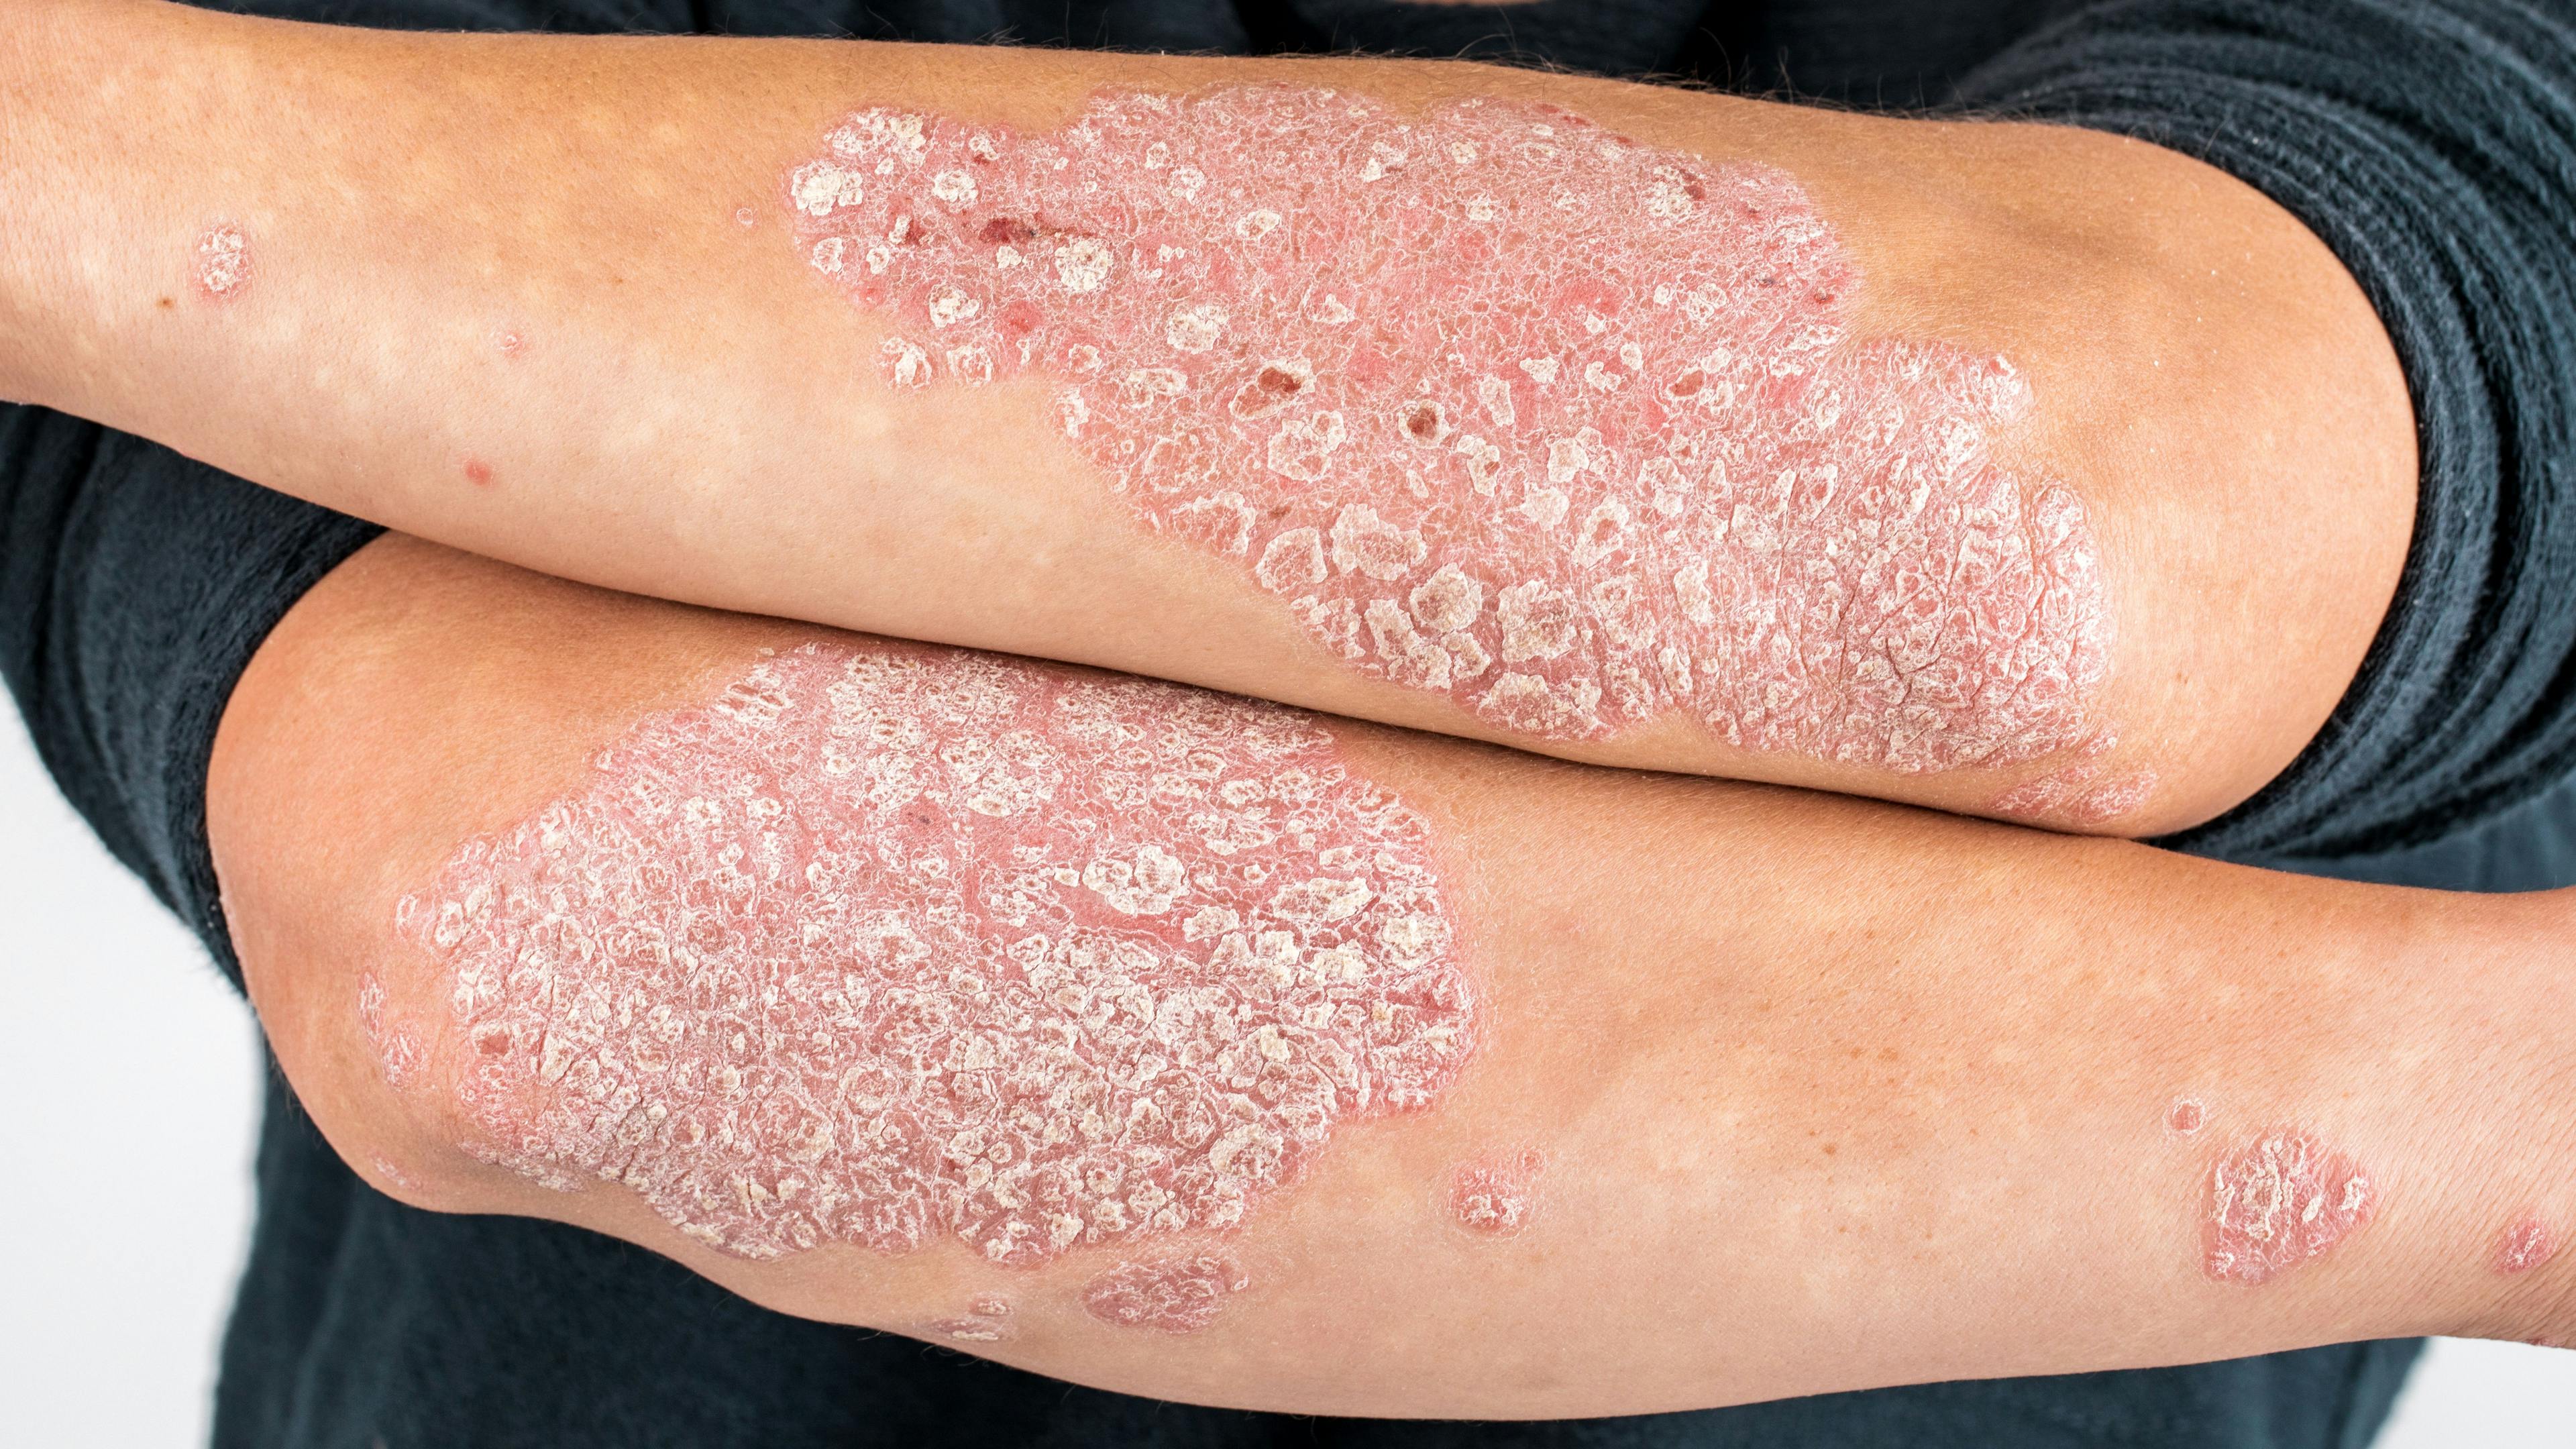   No Increase of Serious Infection Risk From Systemic Medications in Pediatric Psoriasis Treatment 